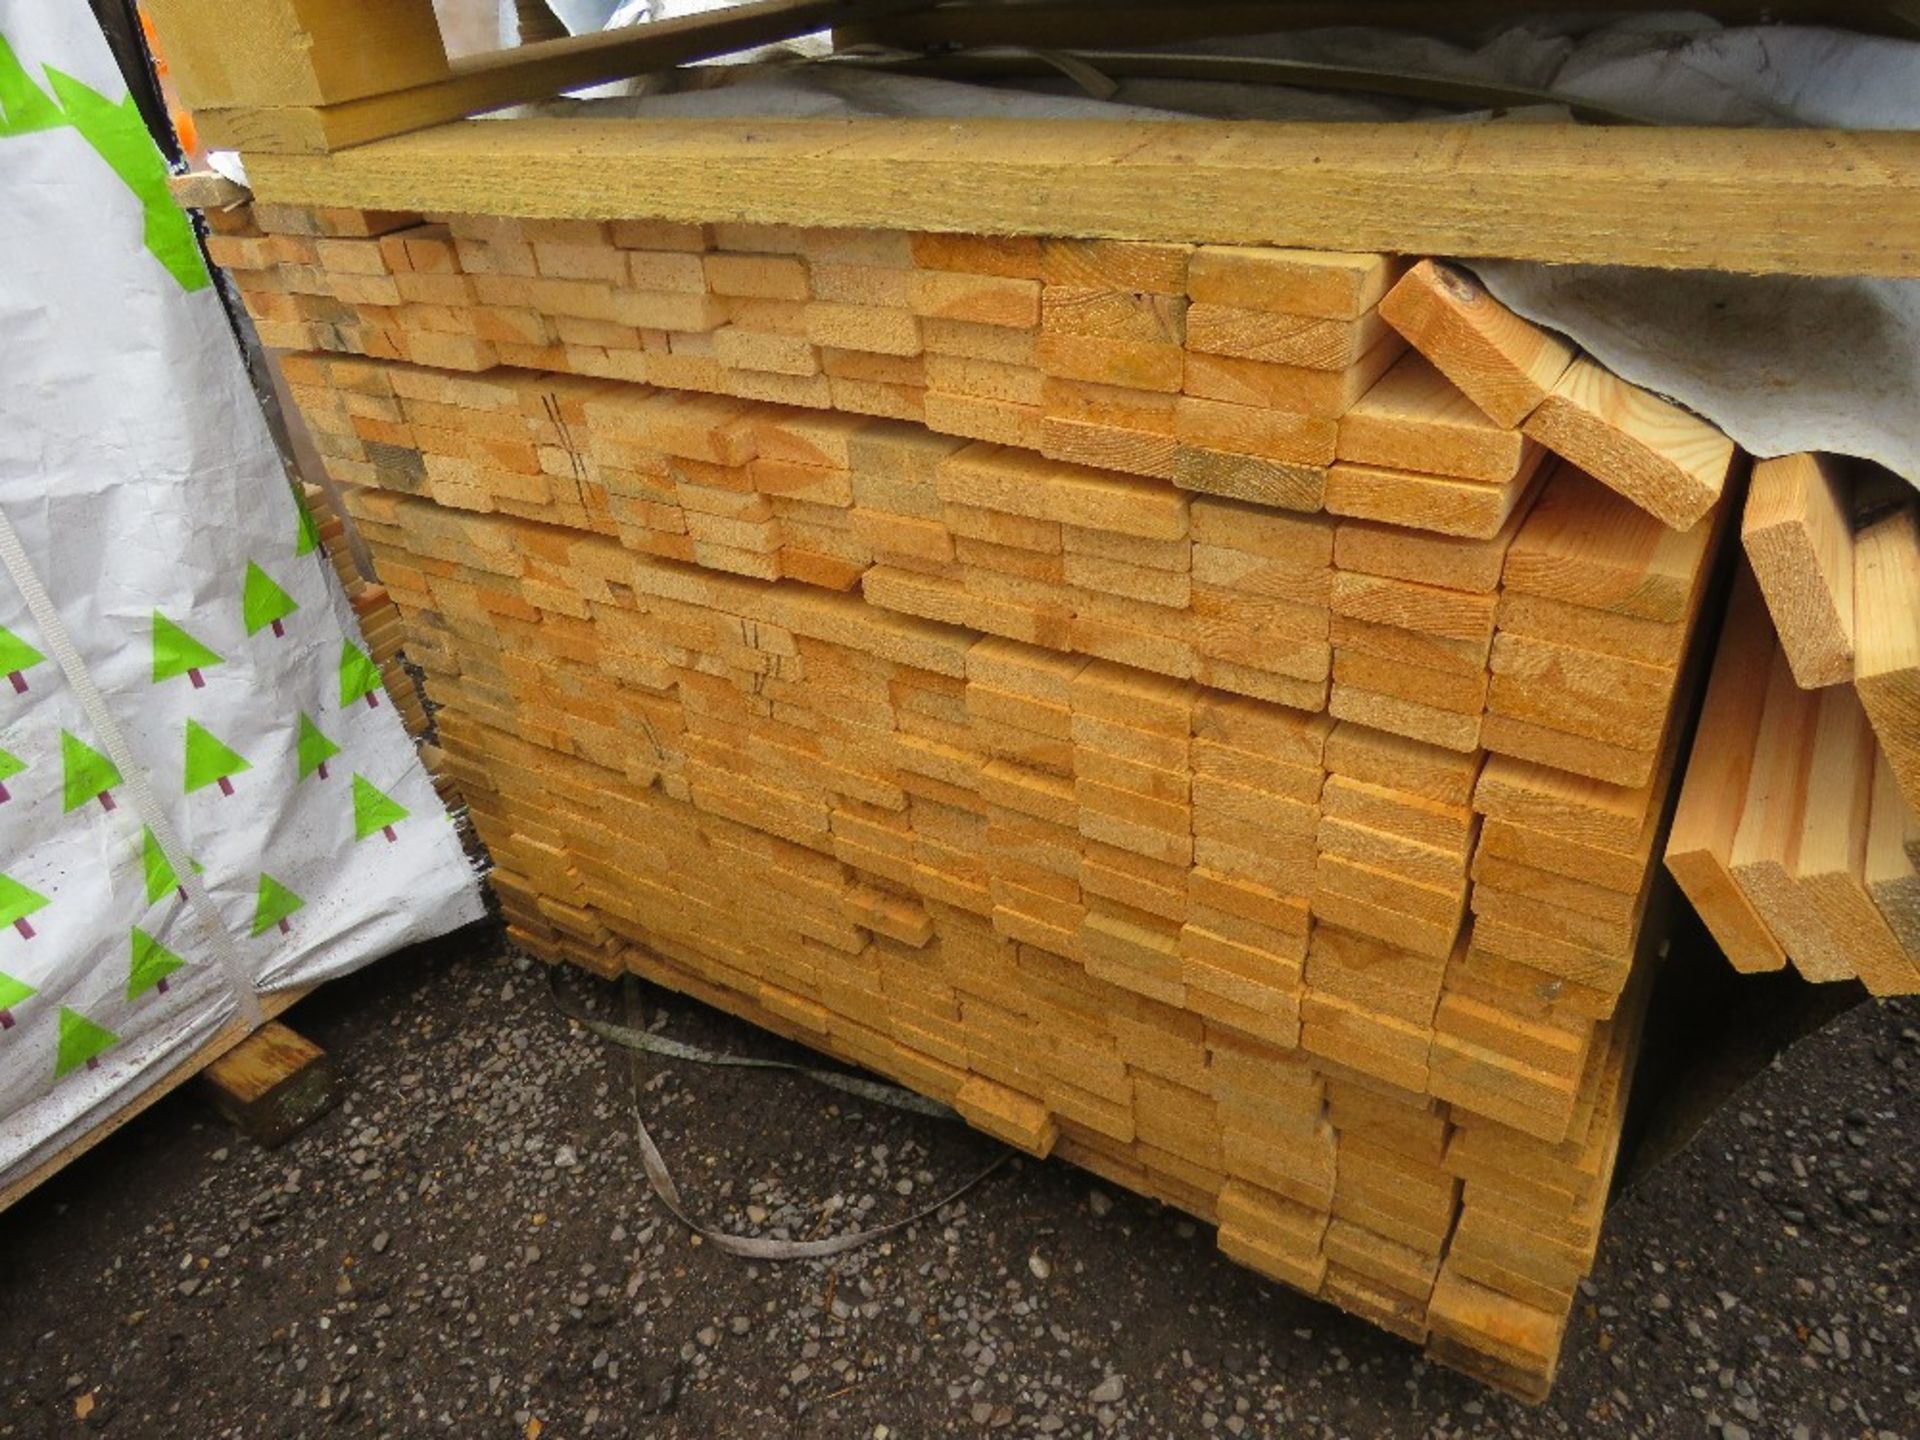 PACK OF UNTREATED TIMBER BOARDS/RAILS, 1.8M LENGTH X 70MM X 20MM APPROX. - Image 2 of 3